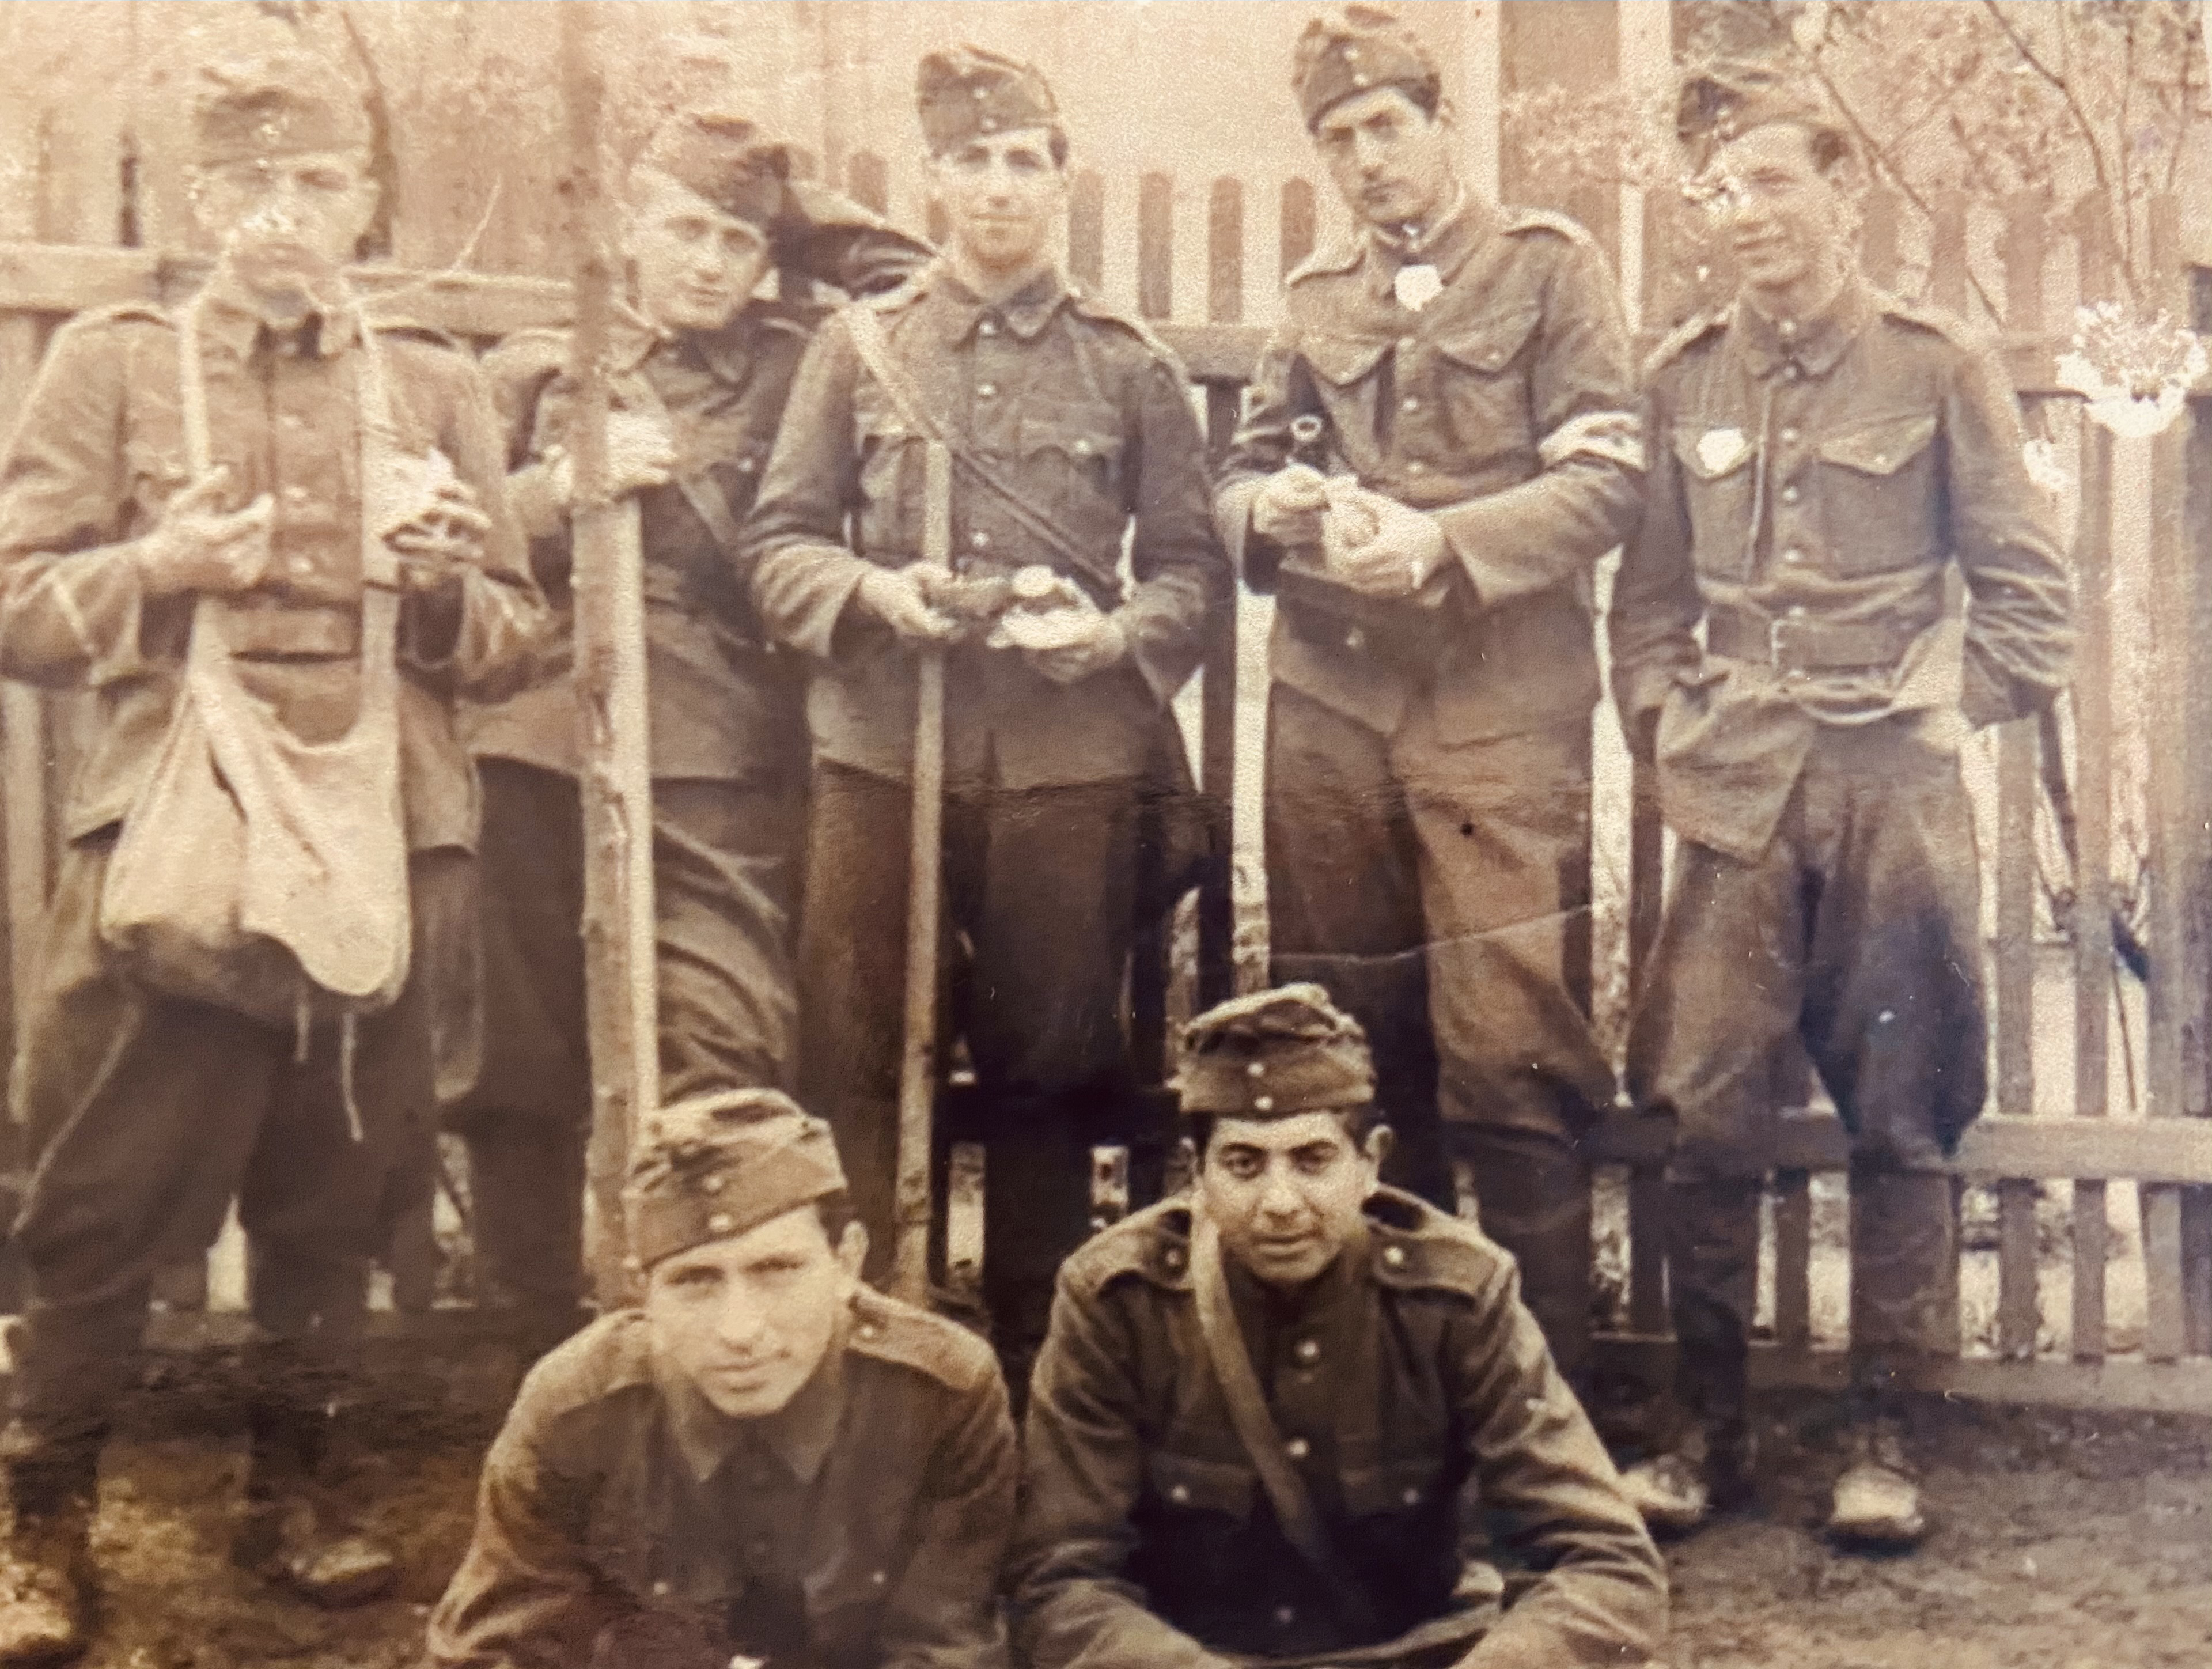 At bottom right, Esther Kahn's brother Alexander, during the war, in the service of the Russian army.